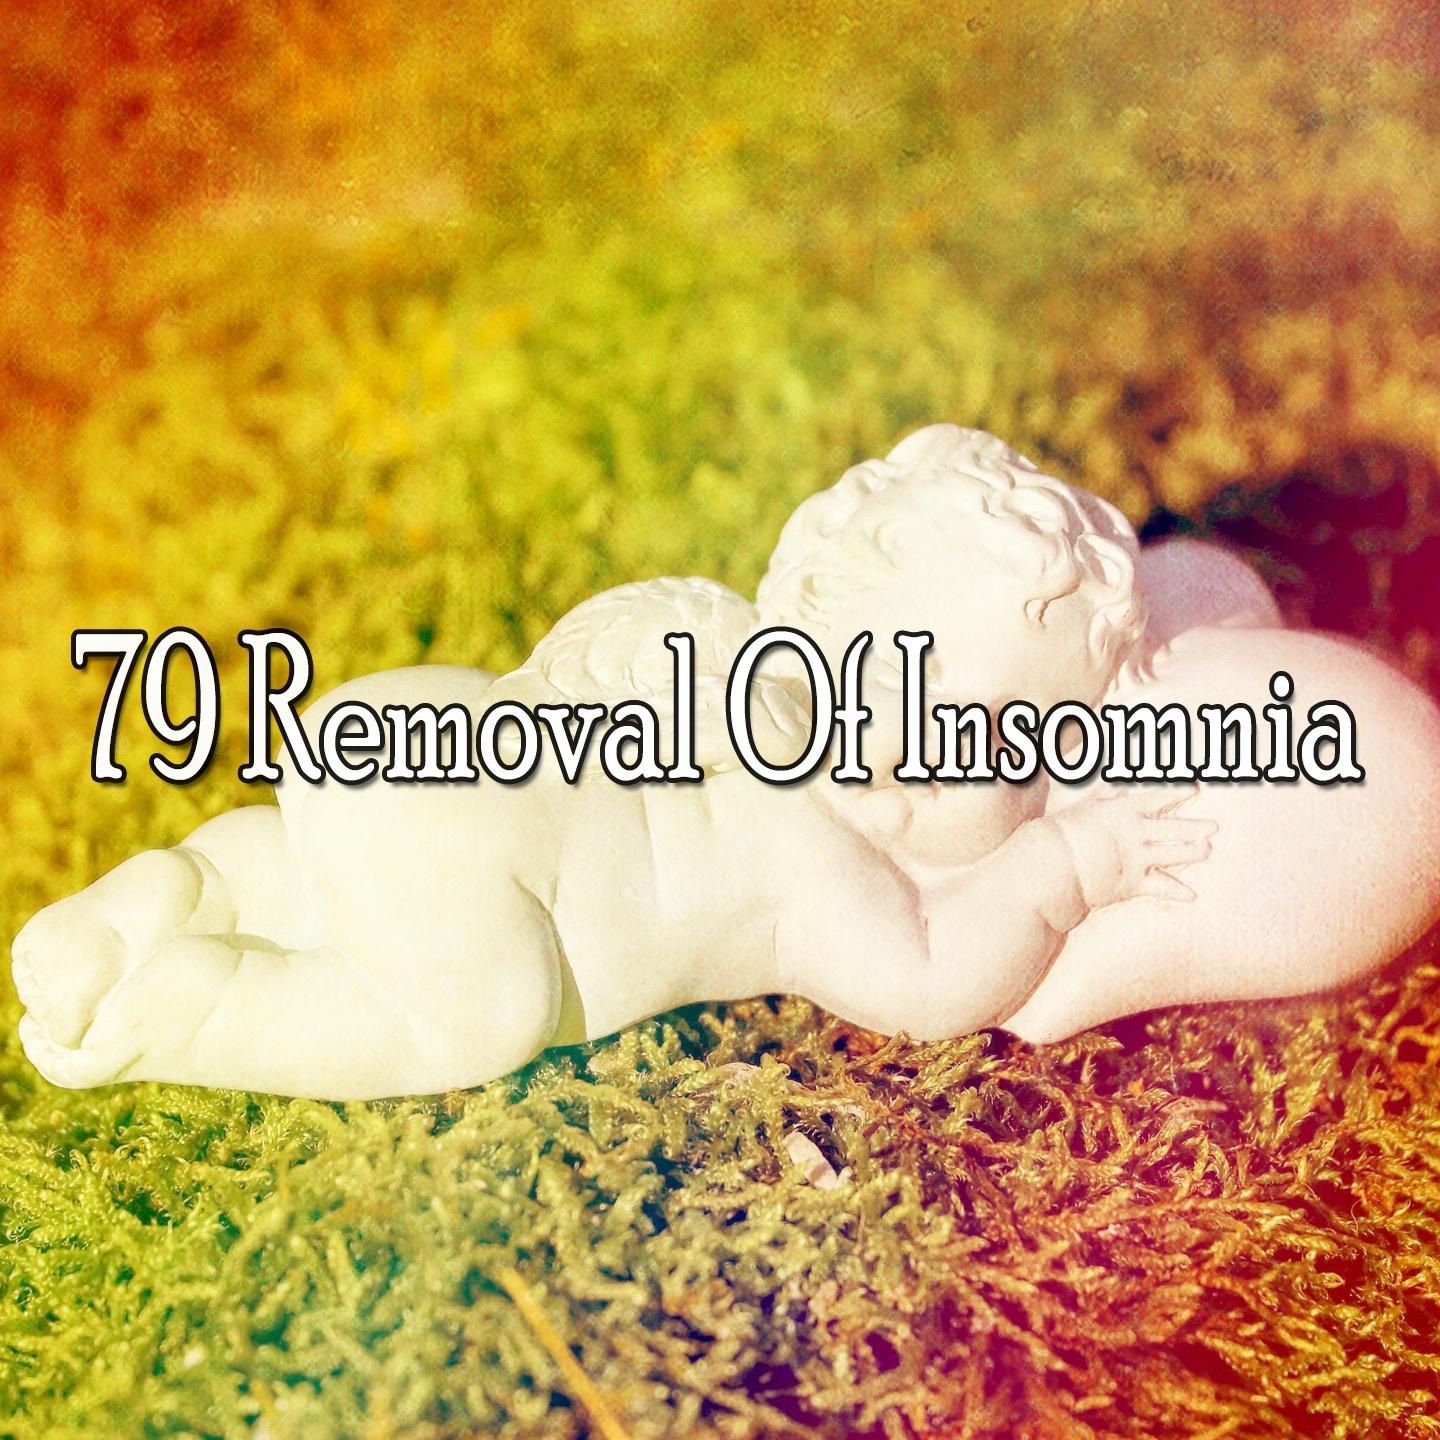 79 Removal of Insomnia